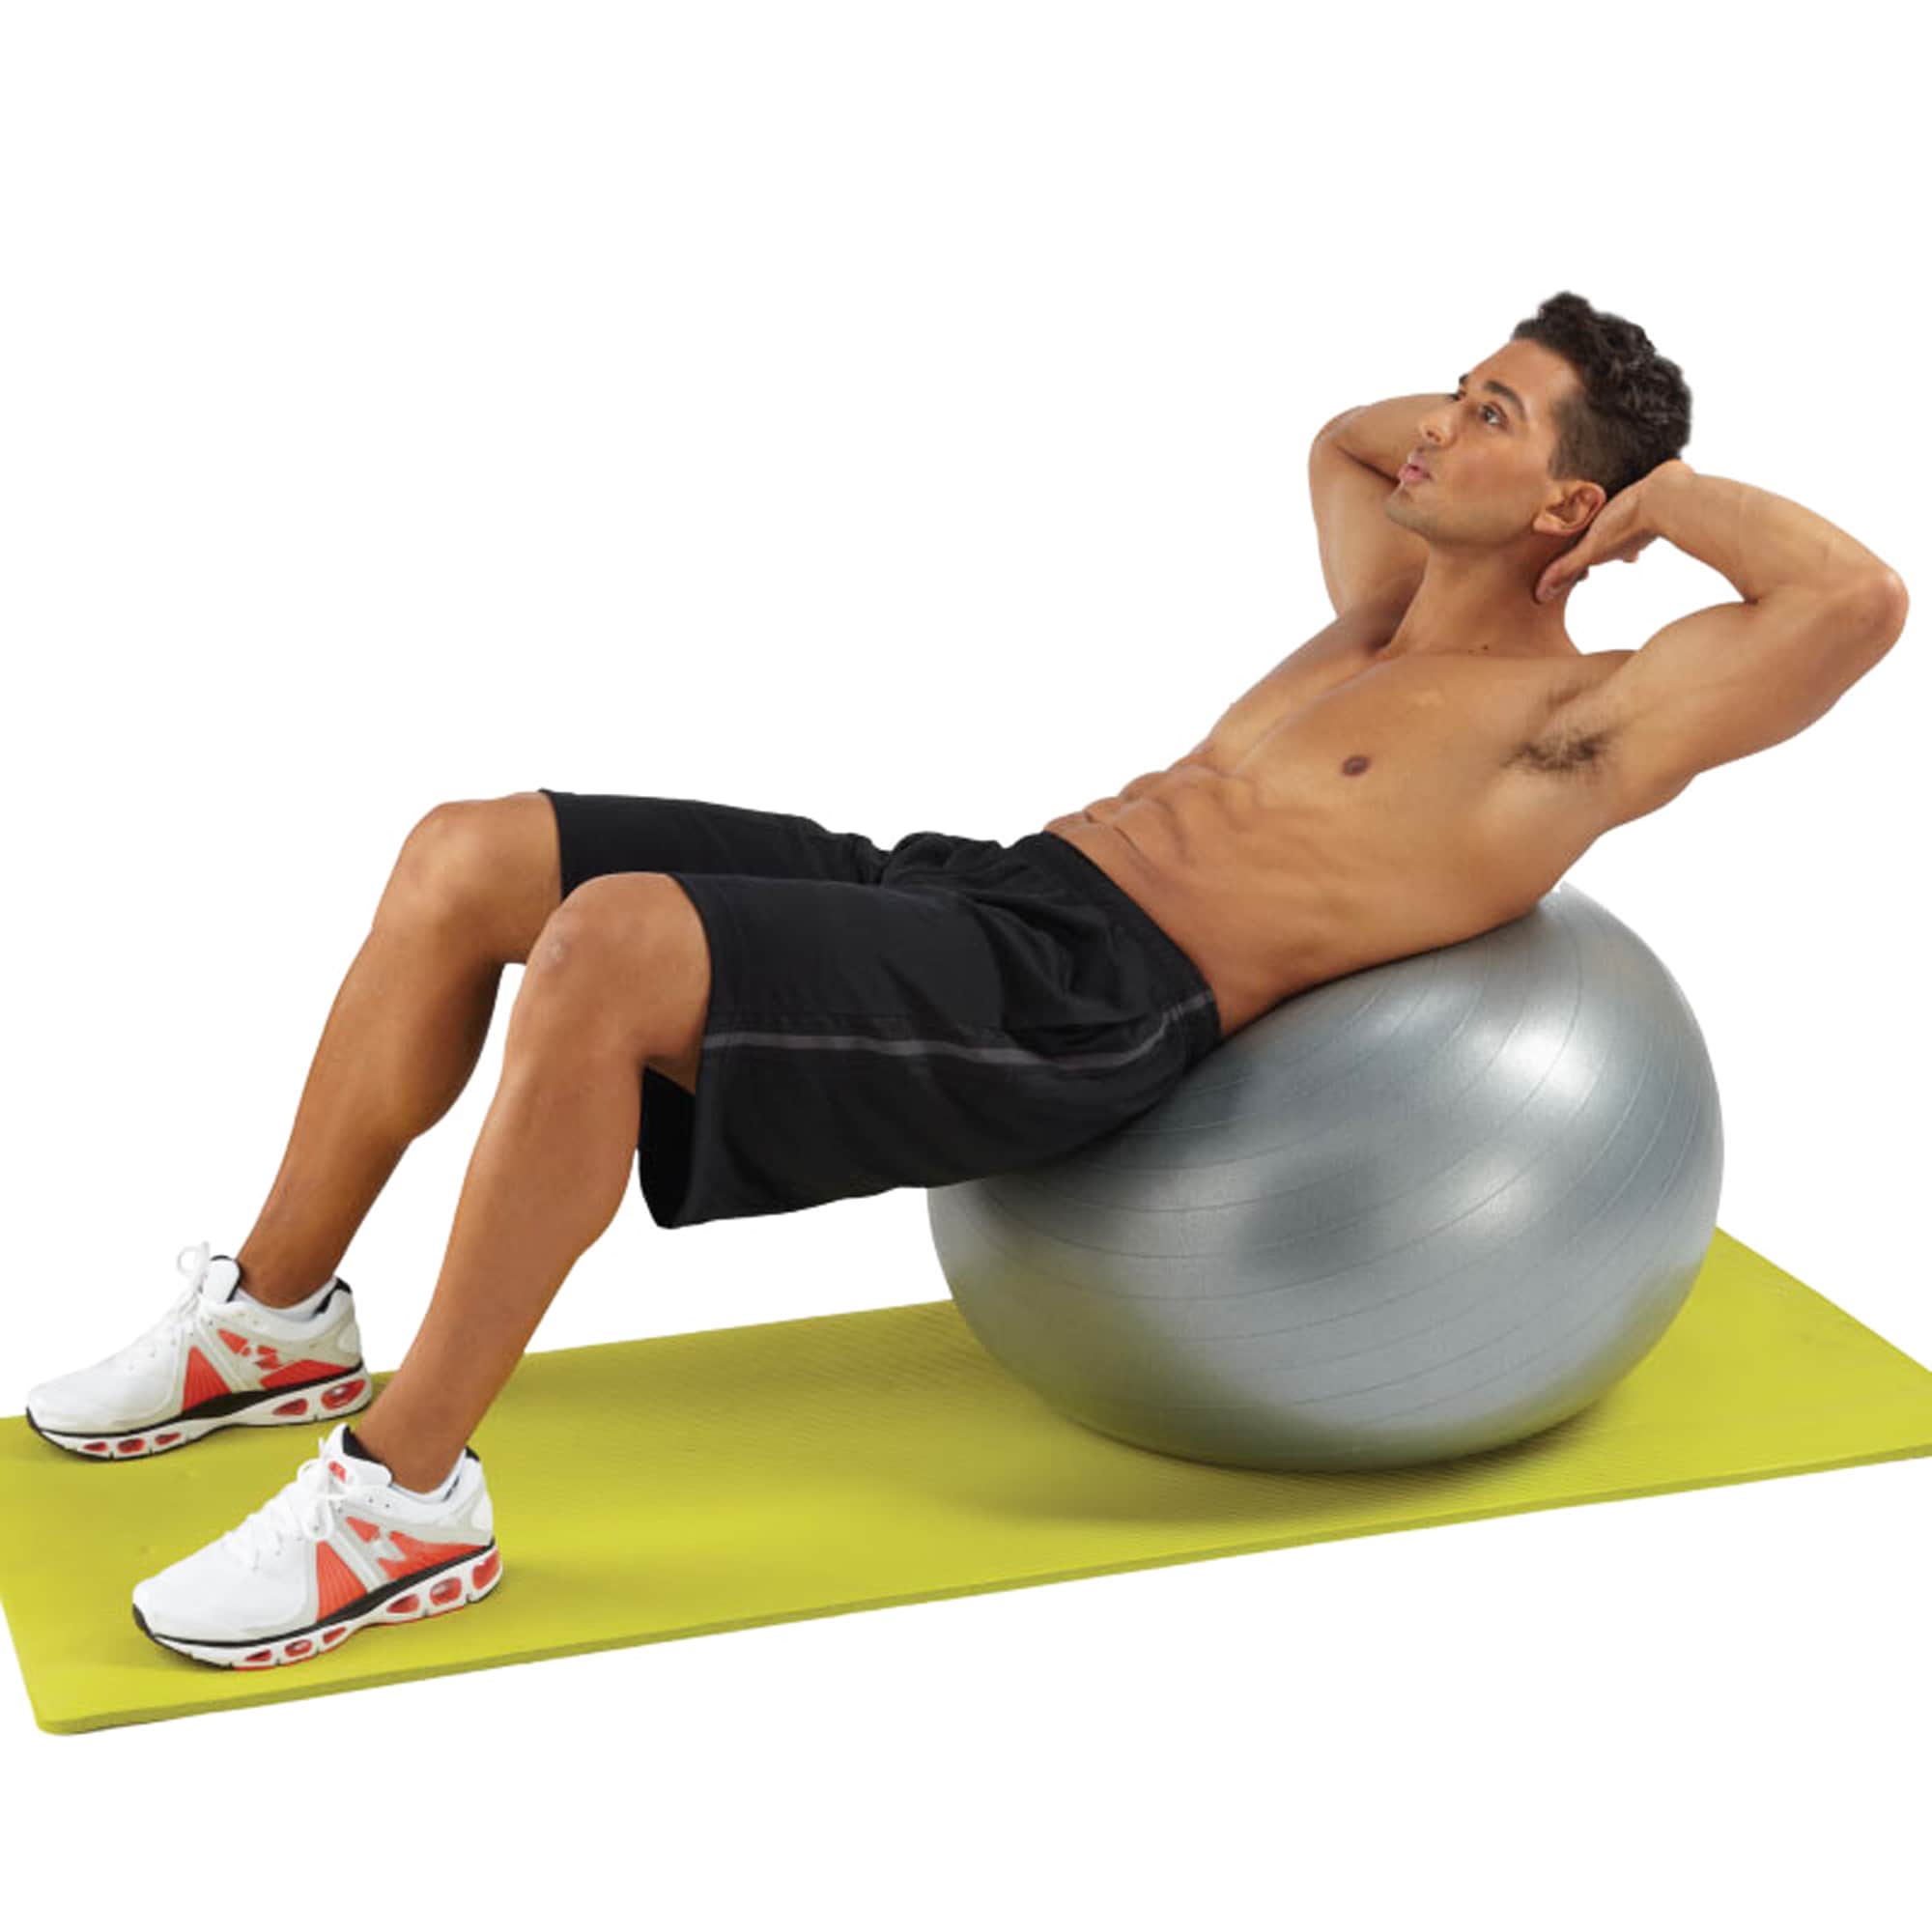 65 or 75cm Inc Pump home exercise Details about   Pure2Improve Exercise Gym Ball Yoga Pilates 